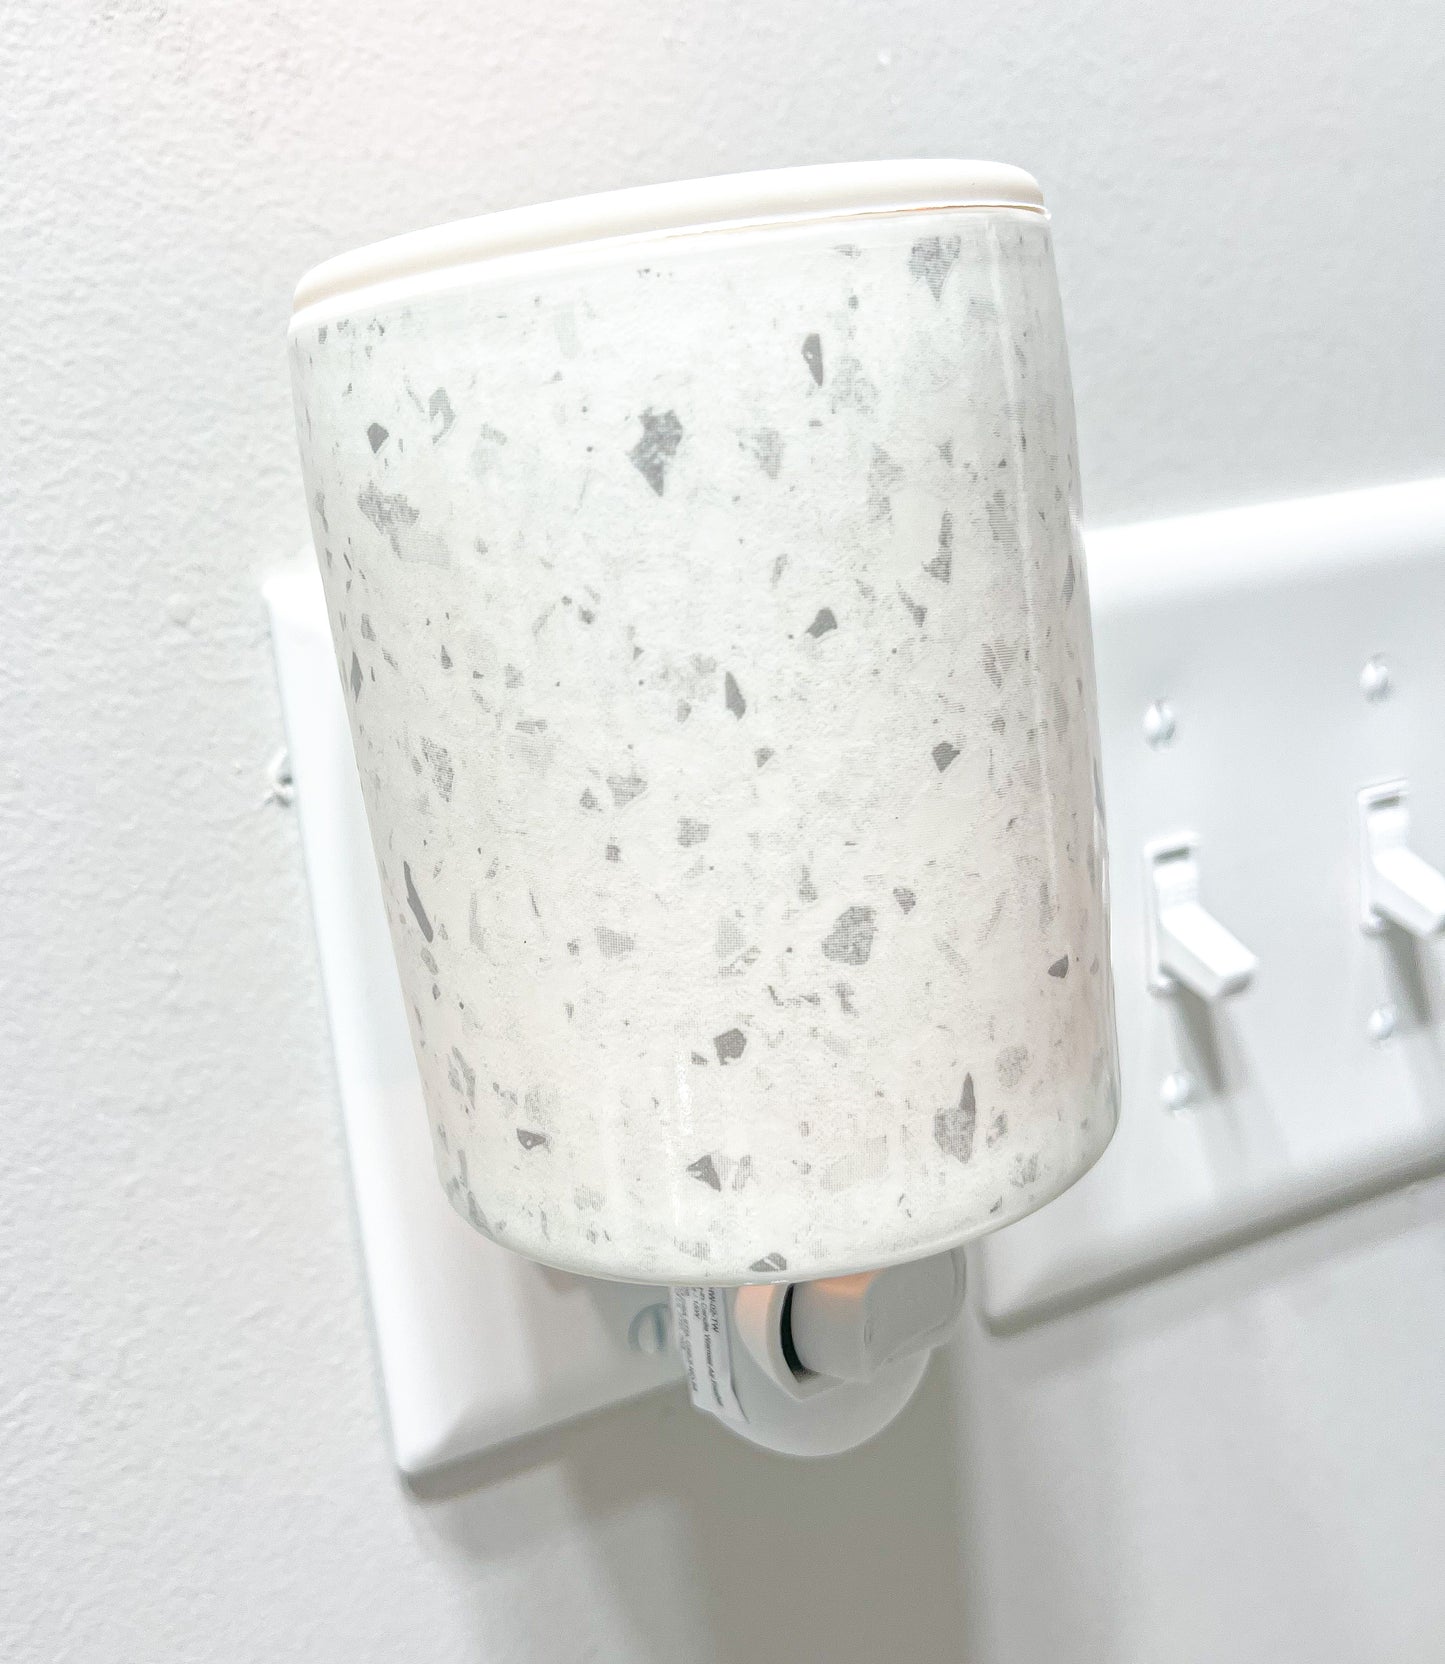 Outlet Plug-In Wax Warmers